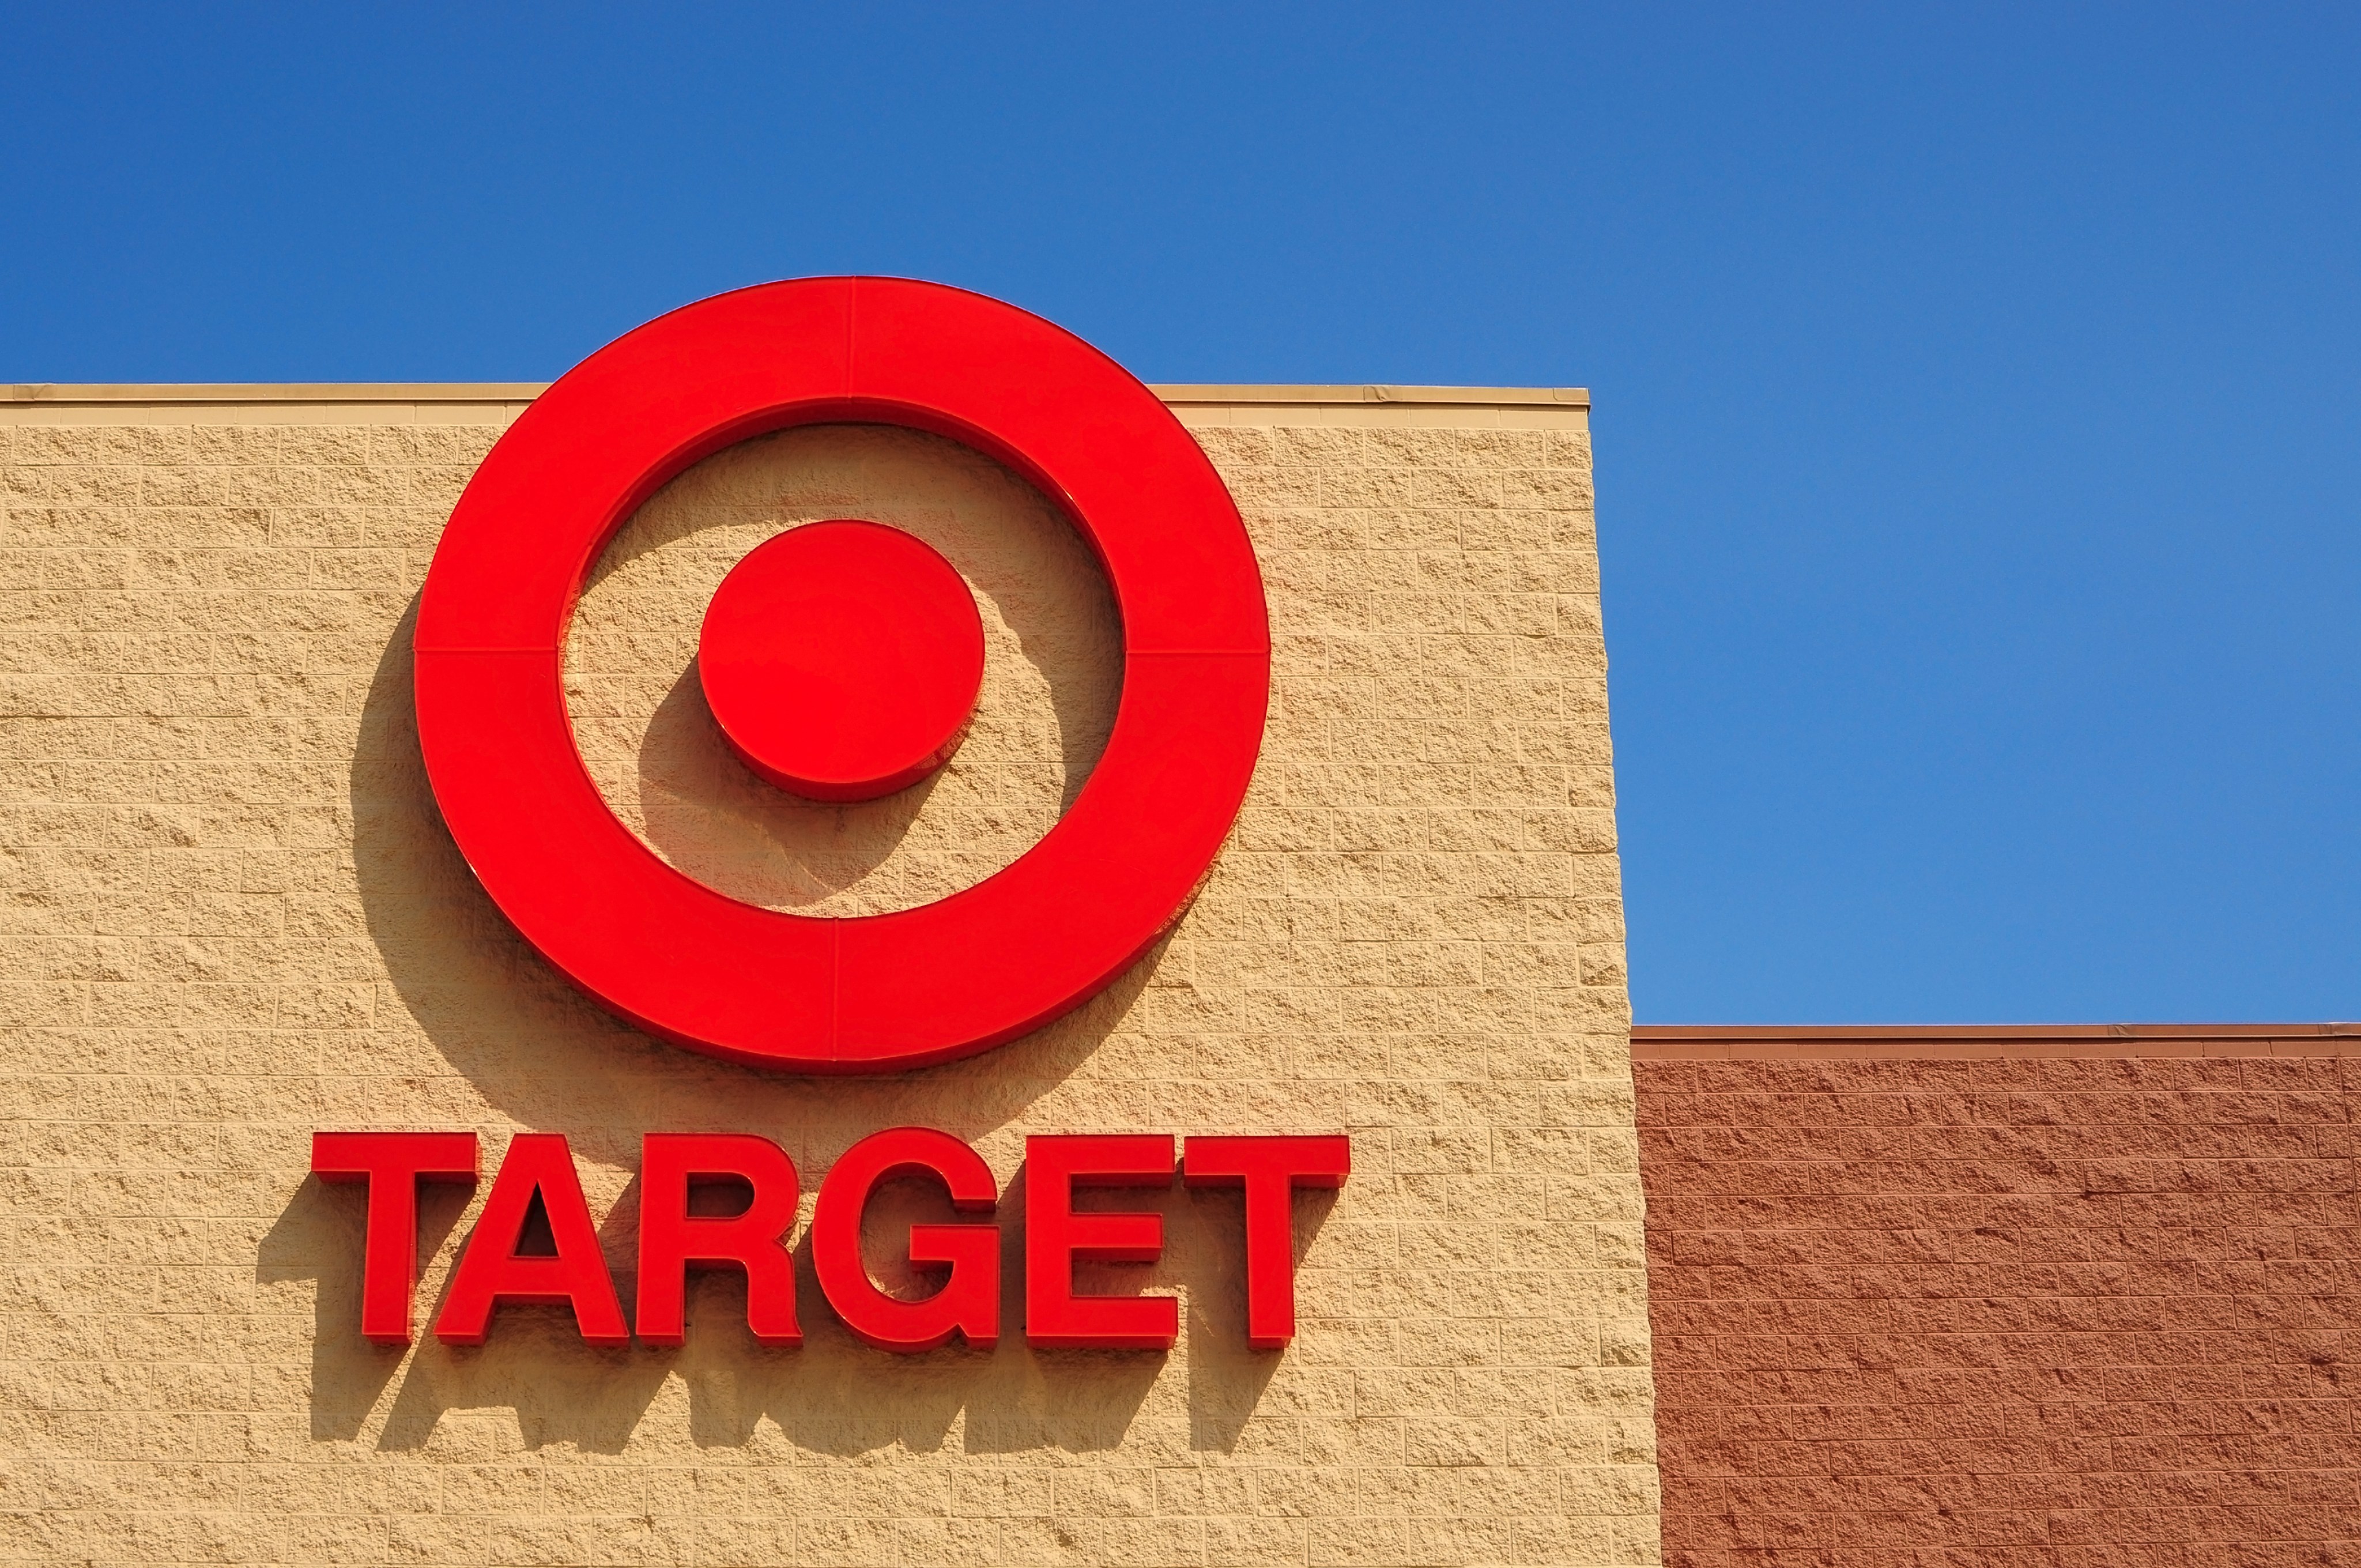 Target announces U.S. closures: which locations will be affected